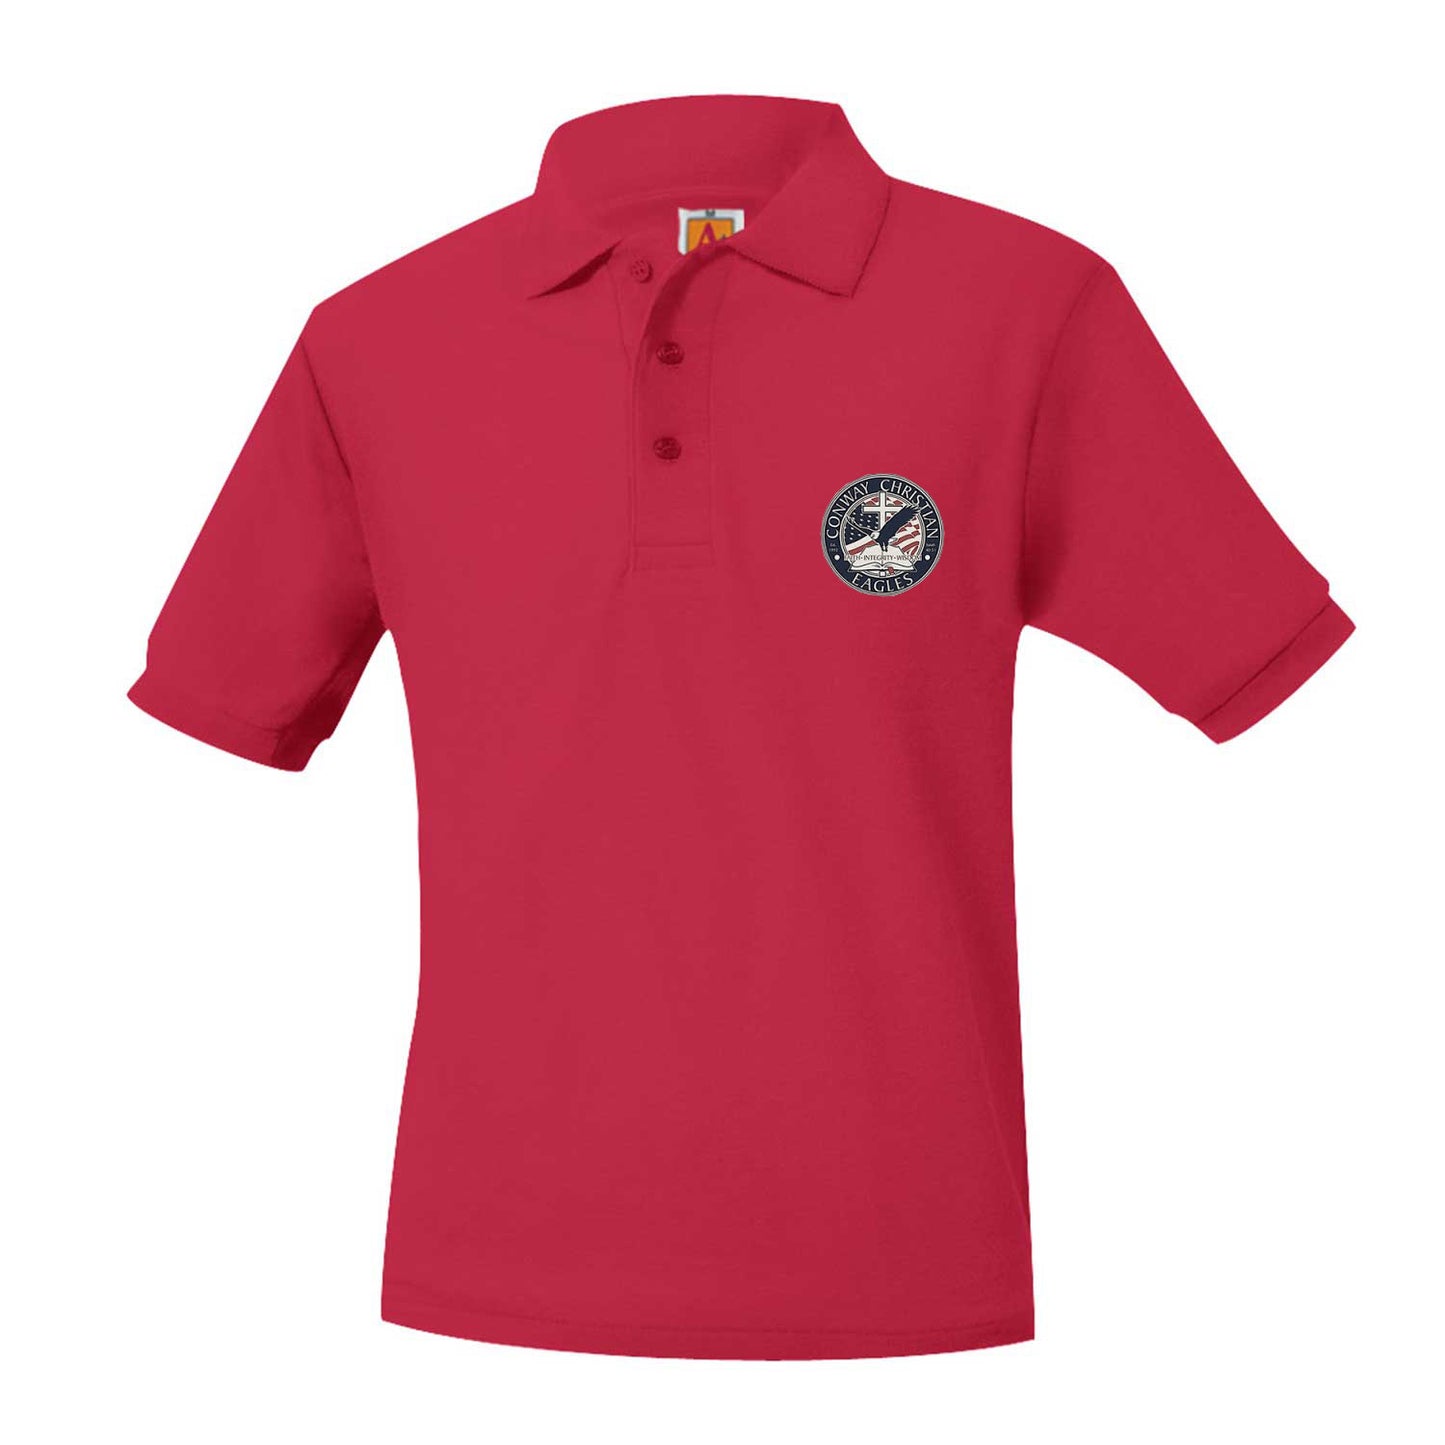 Adult Short Sleeve Smooth Polo With Conway Christian School Logo